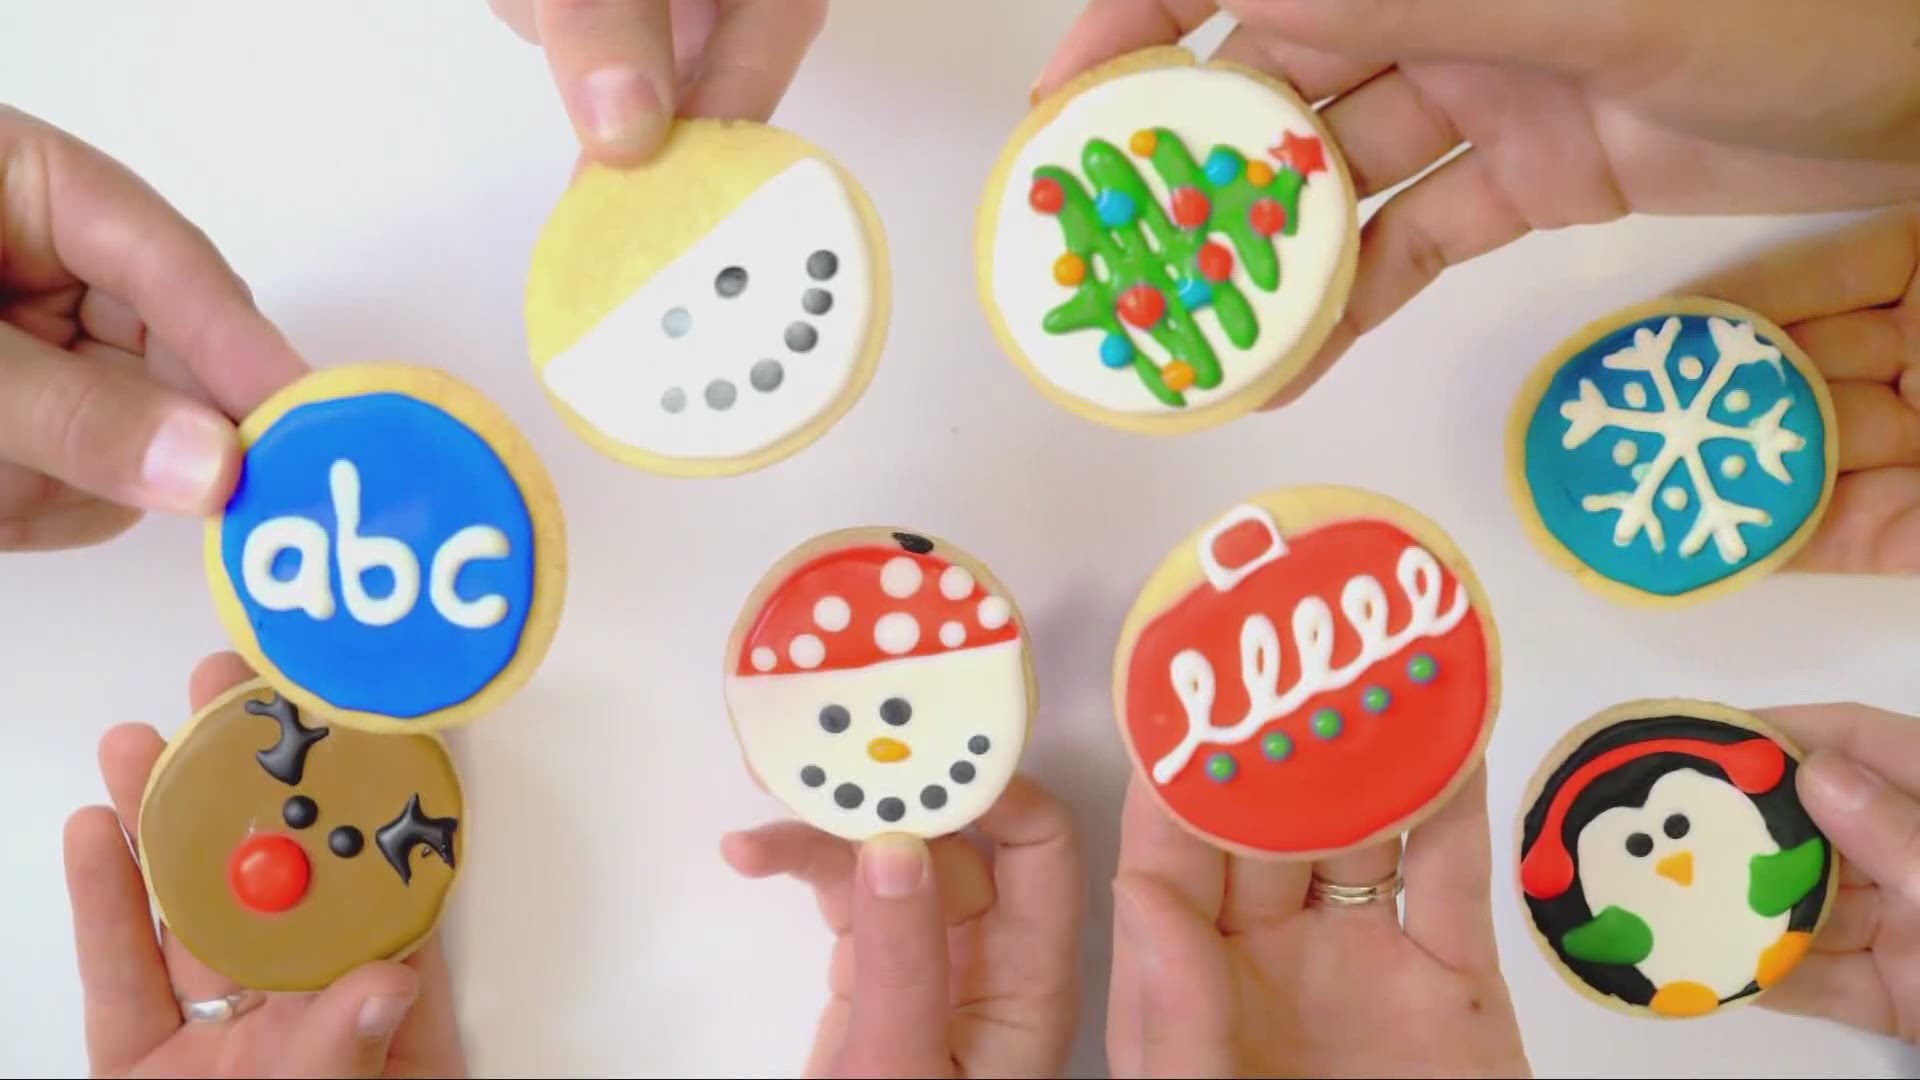 Learn how to make the perfect holiday cookies that will be sure to wow your guests this holiday season.